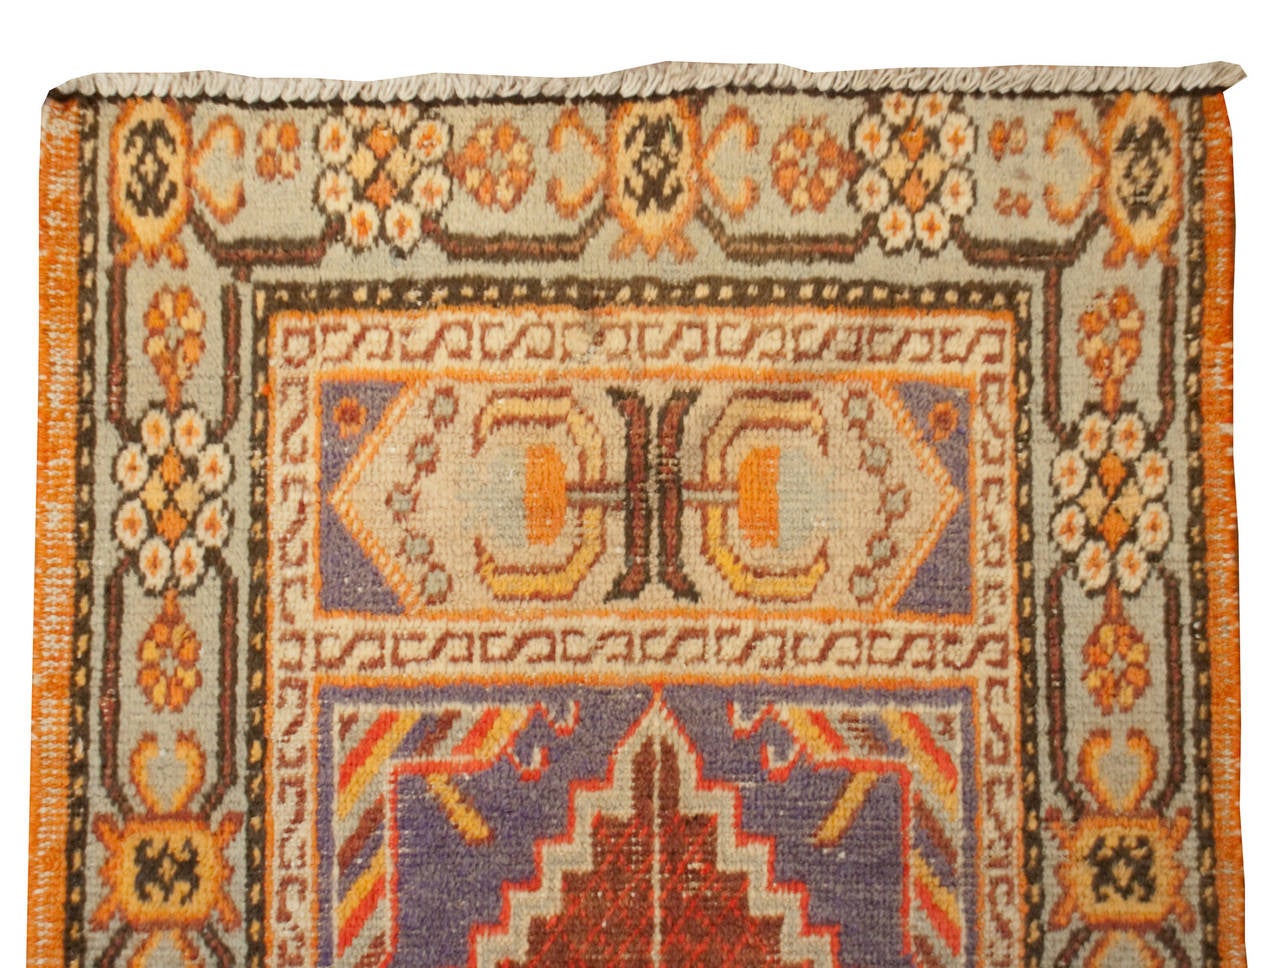 An early 20th century Central Asian Khotan prayer rug with a beautiful floral border surrounding a central crimson geometric field.